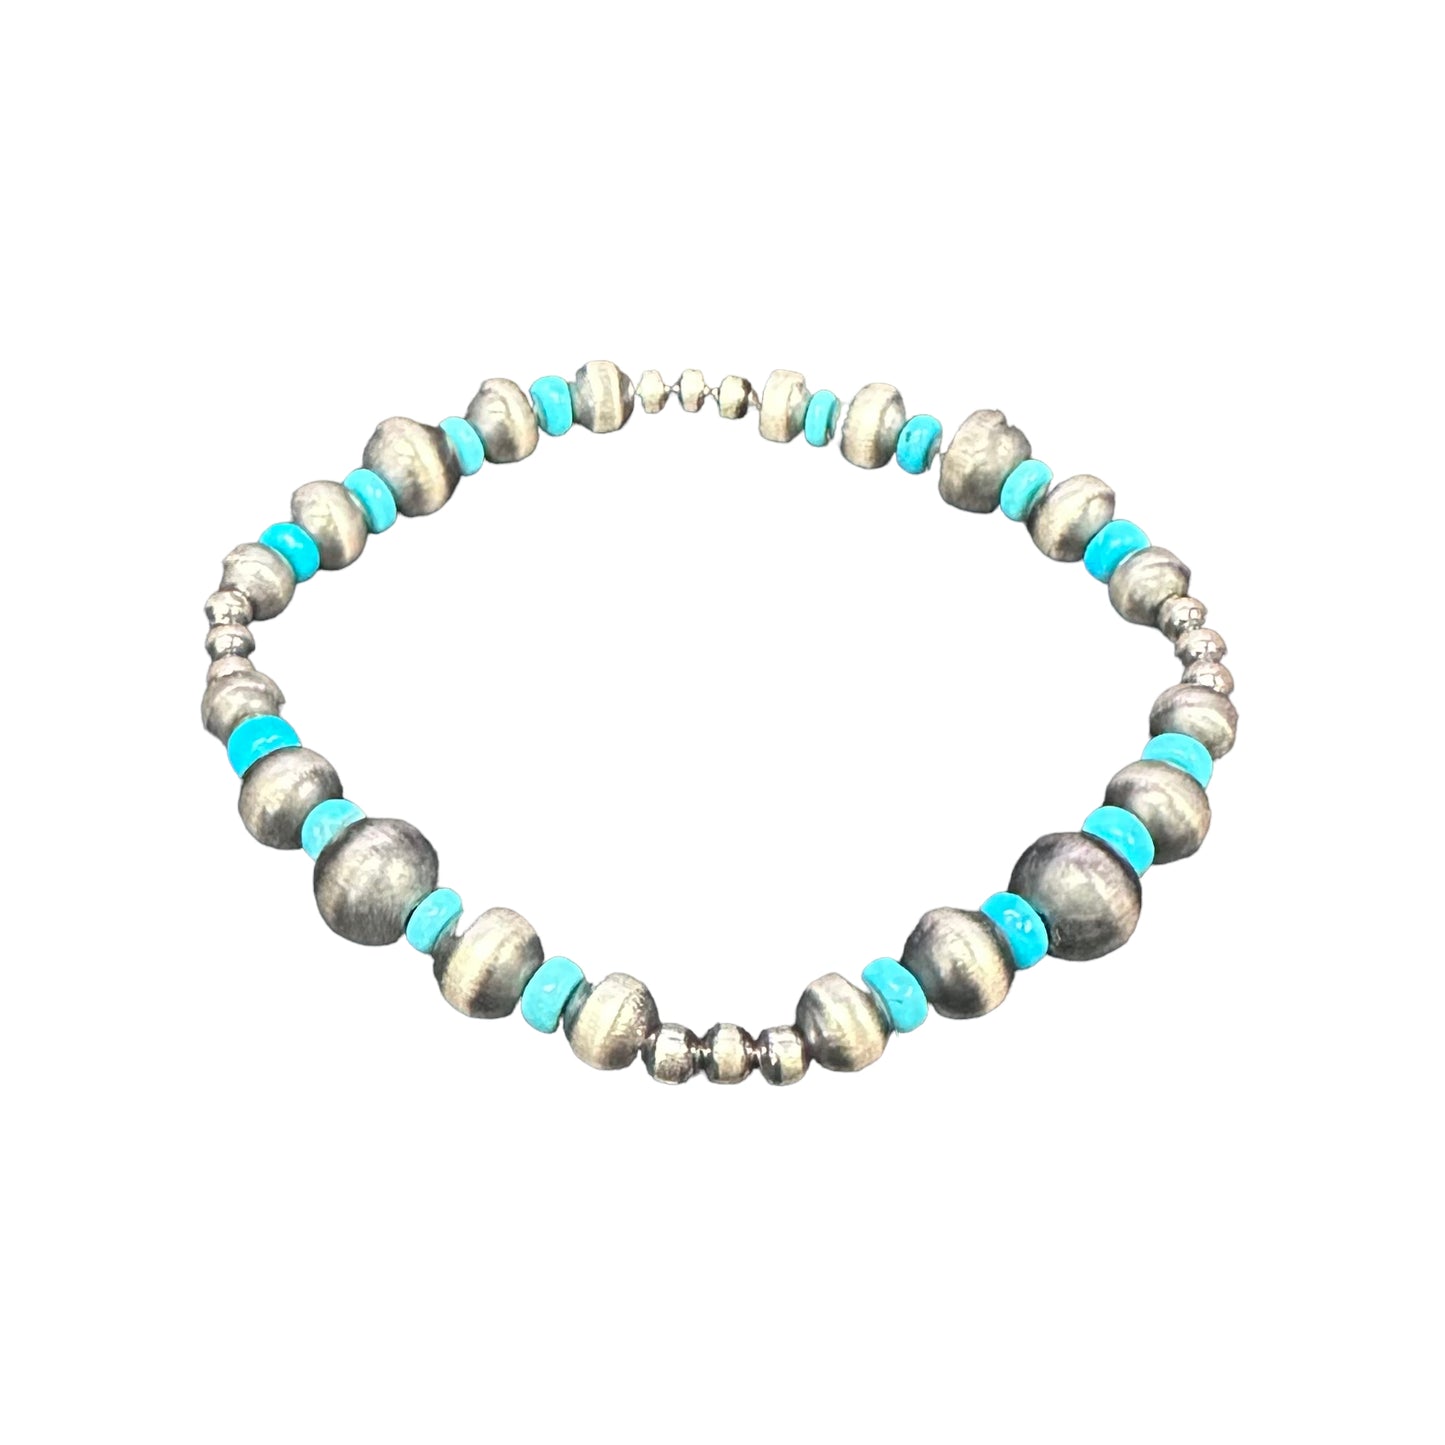 Blue Turquoise Navajo Pearl Oxidized Bead Stretch Bracelet Sterling Silver